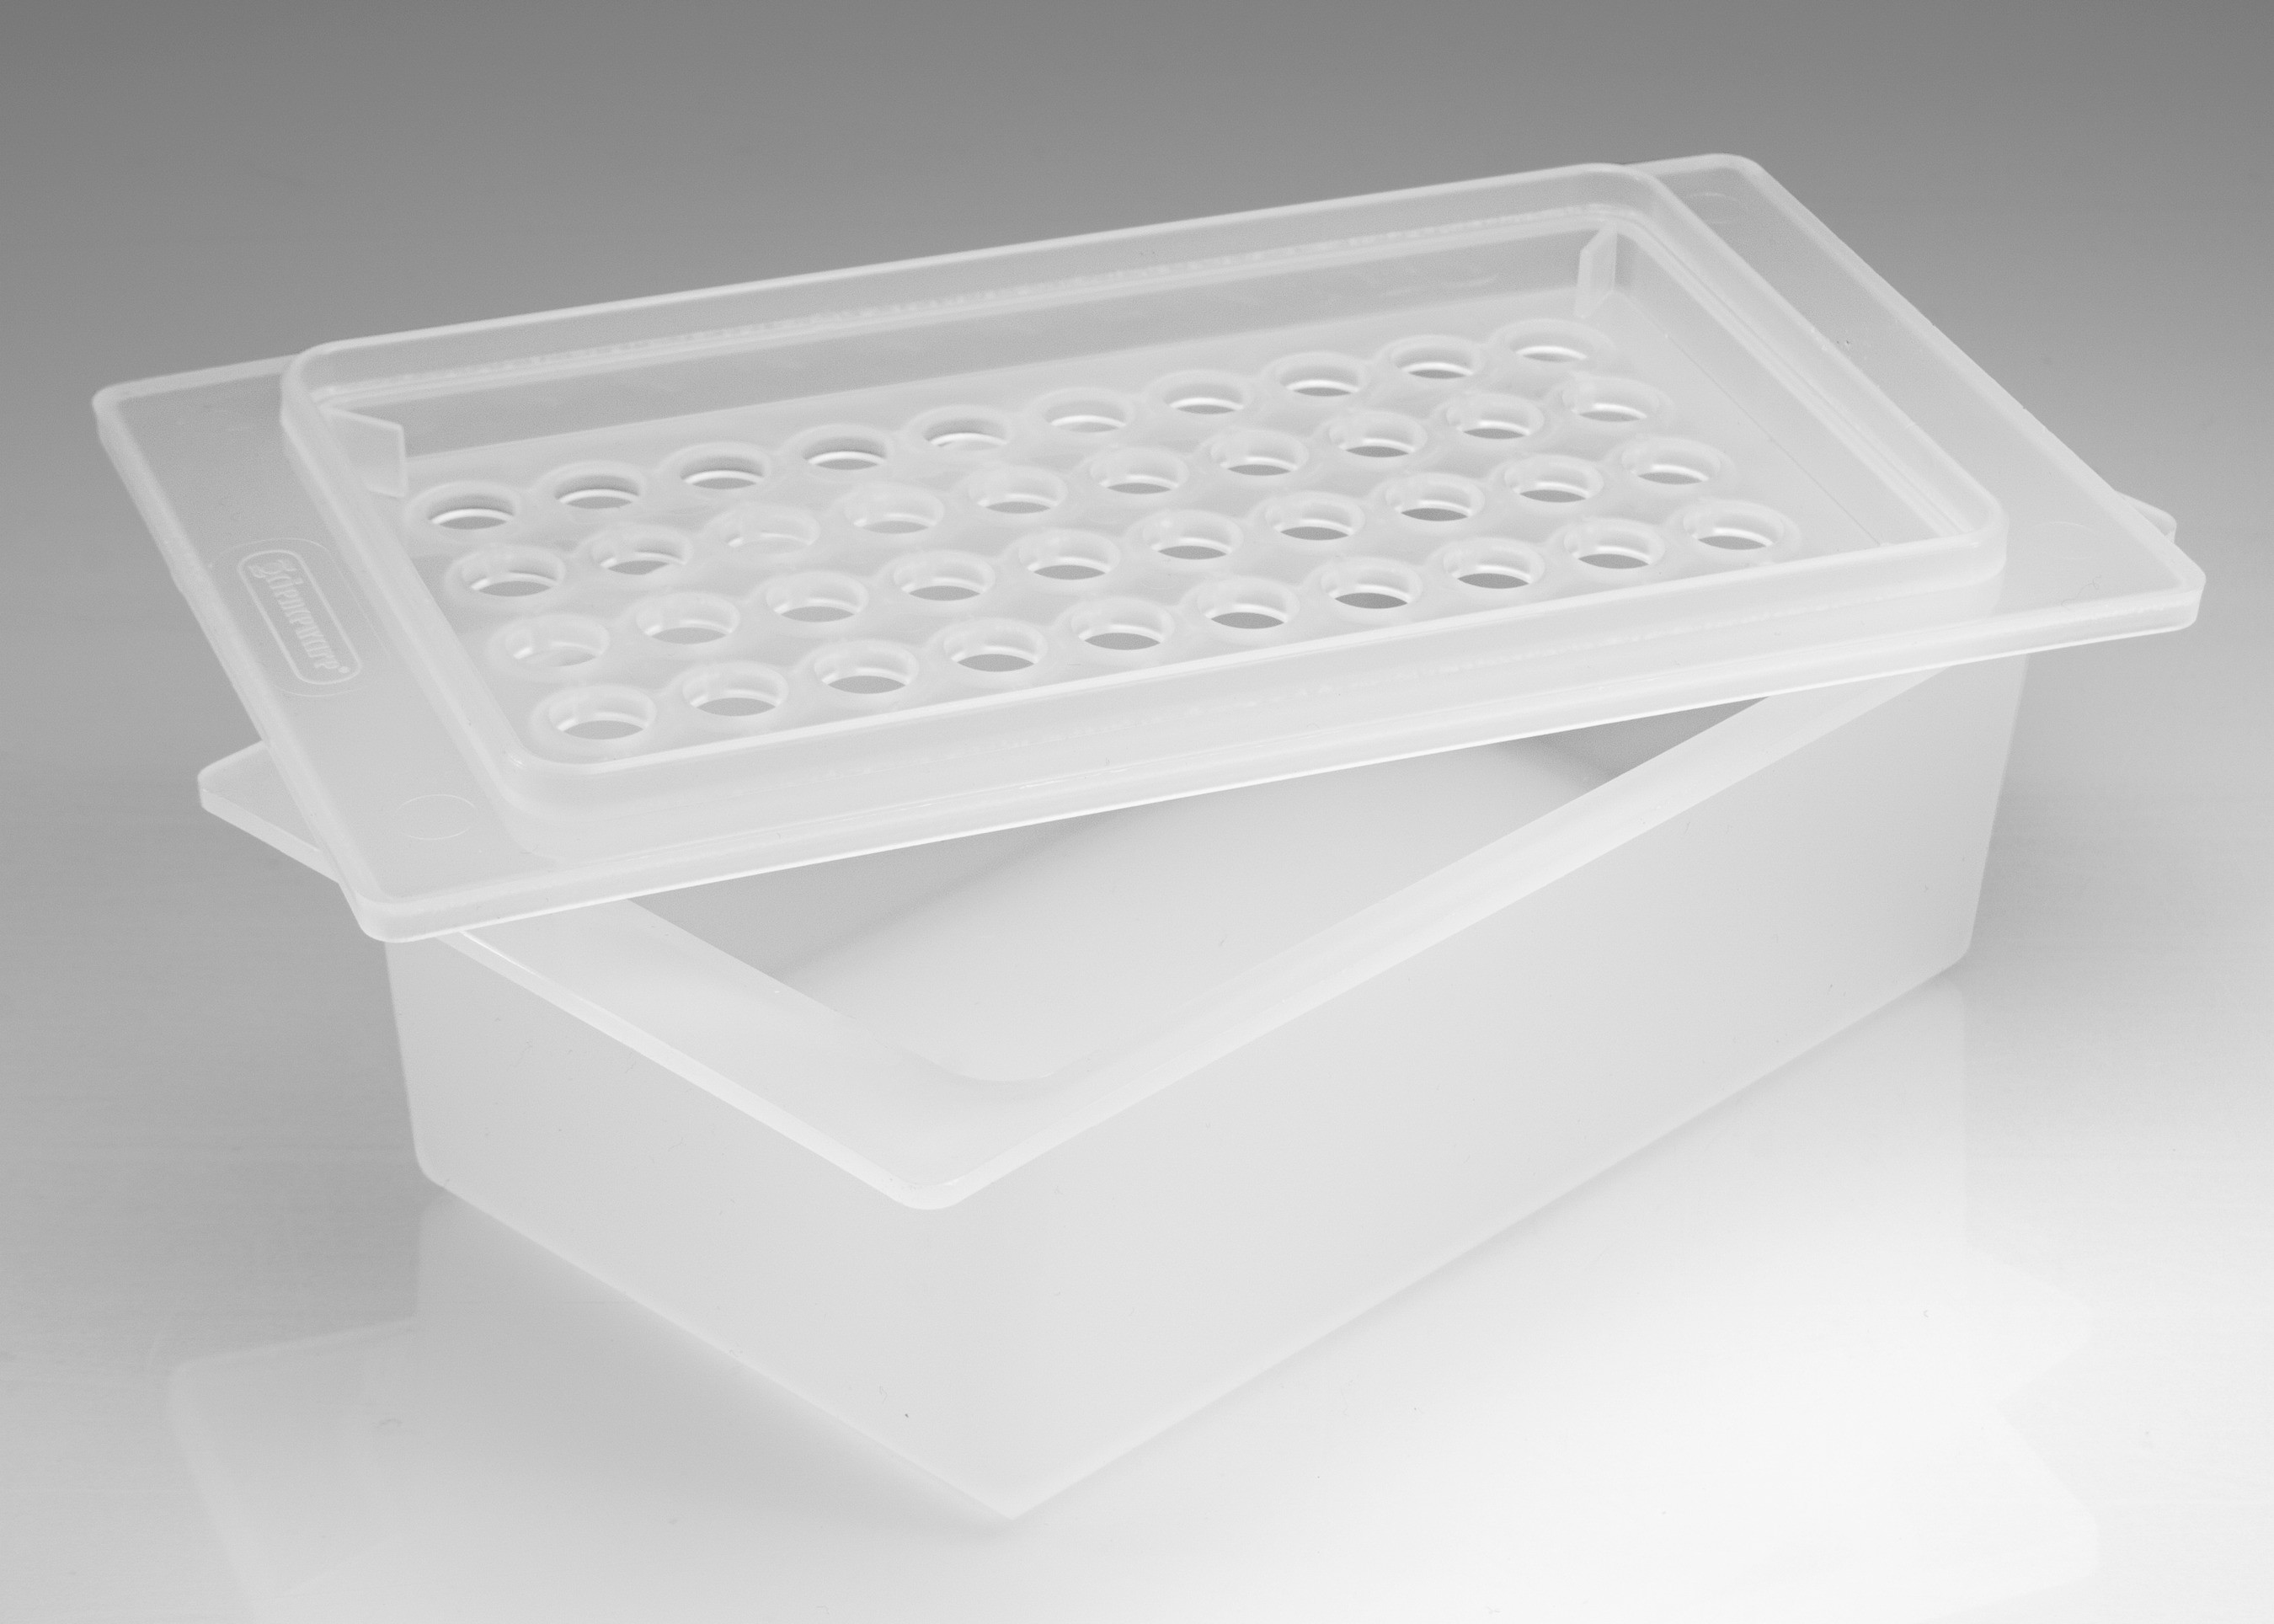 SP Bel-Art Microcentrifuge Tube Ice Rack/Tray; For 1.5ml Tubes, 50 Places